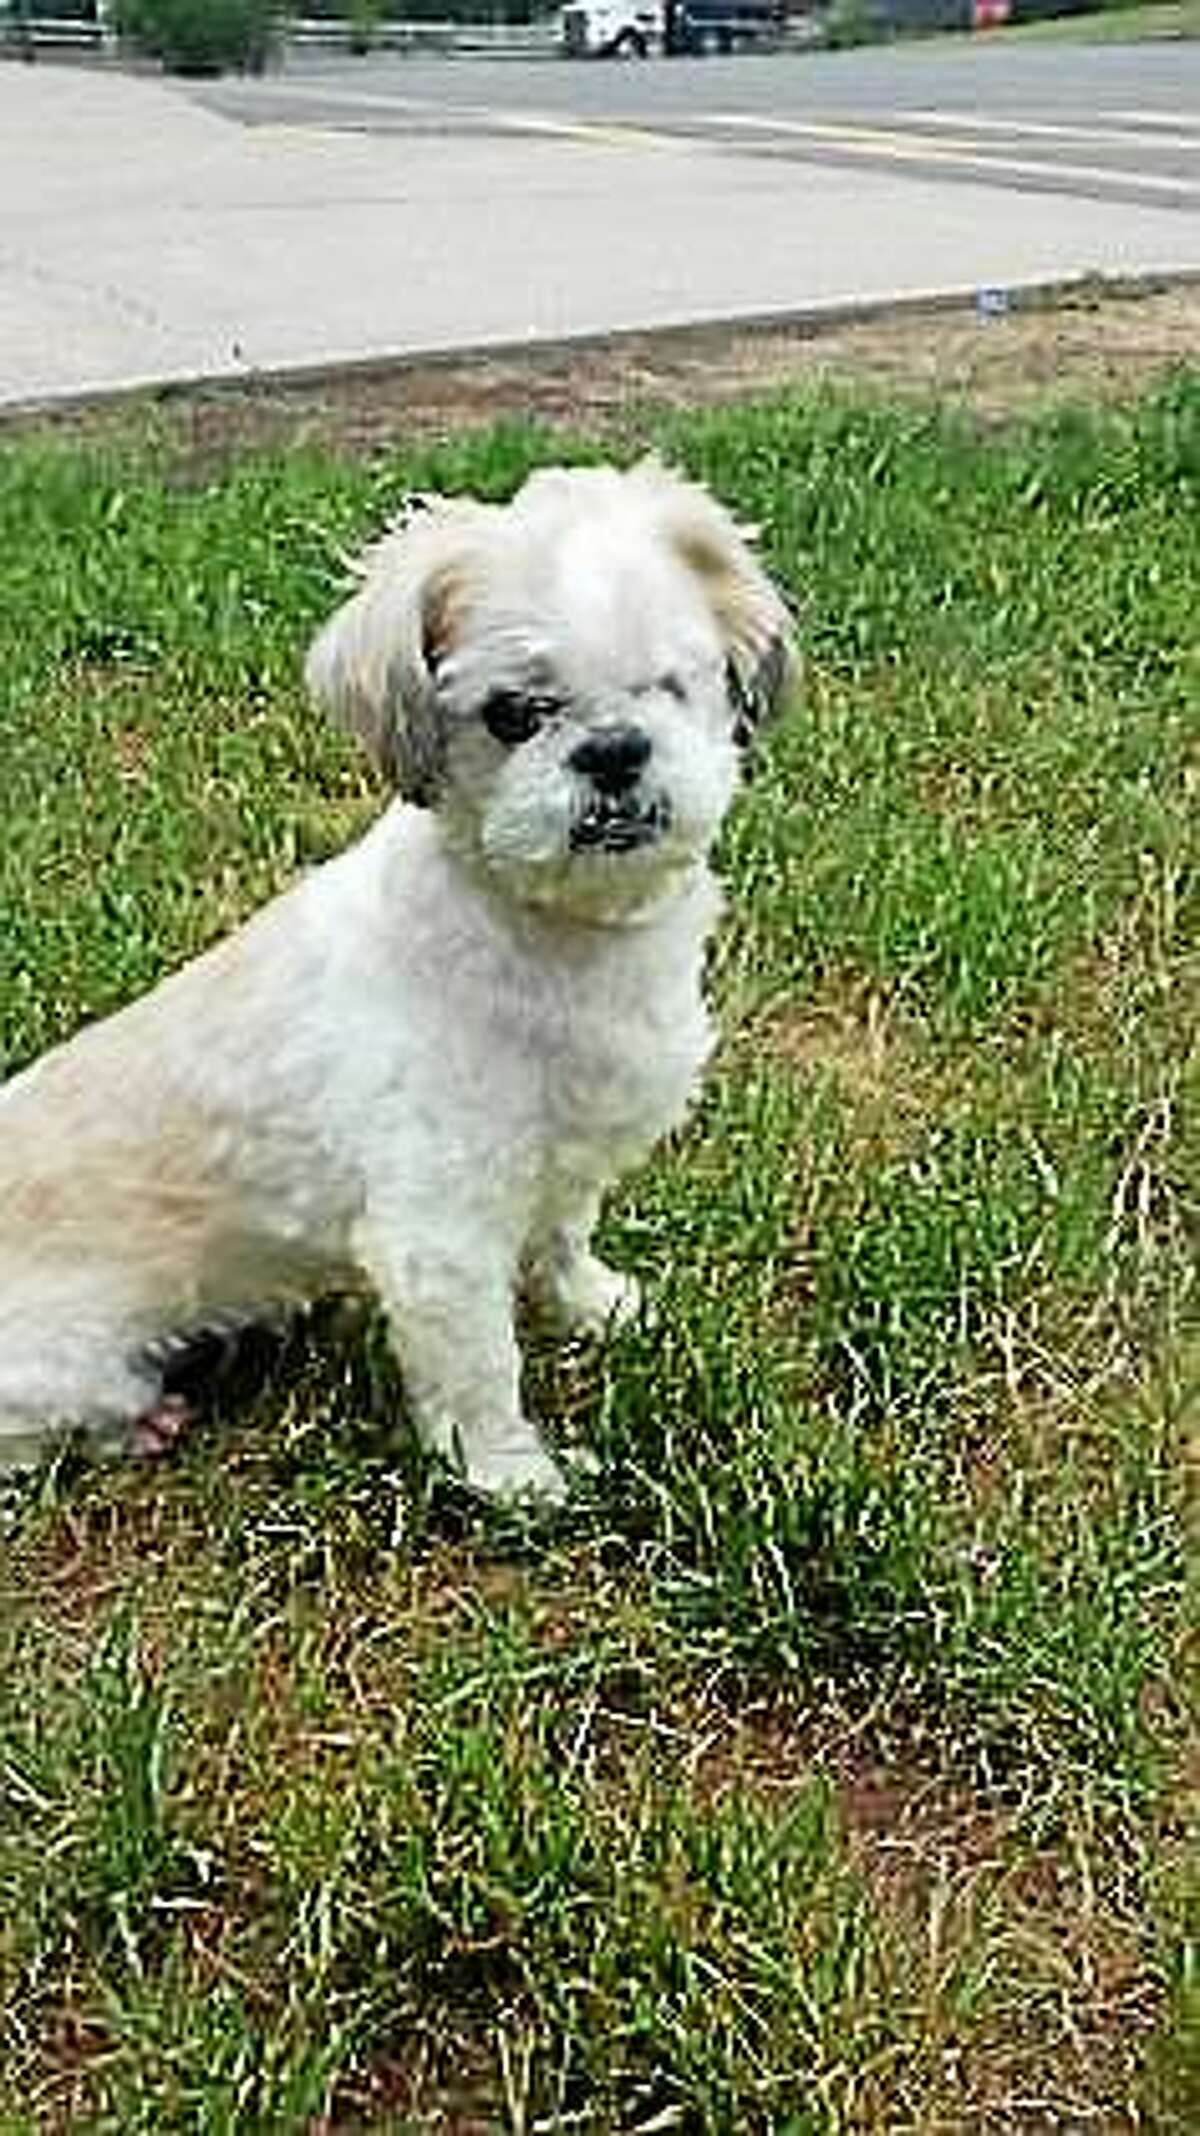 Tony Tony is a 5-year-old Shih Tzu mix and he is totally blind. But for the right home with special needs dog experience, Tony will acclimate nicely. Tonyís home can be a single family home, with condos or apartments considered. Most important, Tony must have a quiet and predictable environment, so an adult household would be best. Tony has not had much experience with cats or dogs but he is willing to consider sharing his home with a gentle, furry friend. This is a great dog, relaxed and calm. Perhaps you already have a dog that needs a companion to care for, and in the end Tony will give back to the family 100 percent. Inquiries for adoption should be made at the Connecticut Humane Society located at 701 Russell Road in Newington or by calling (860) 594-4500 or toll free at 1-800-452-0114. The Connecticut Humane Society is a private organization with branch shelters in Waterford, Westport and a cat adoption center in the PetSMART store in New London. The Connecticut Humane Society is not affiliated with any other animal welfare organizations on the national, regional or local level.